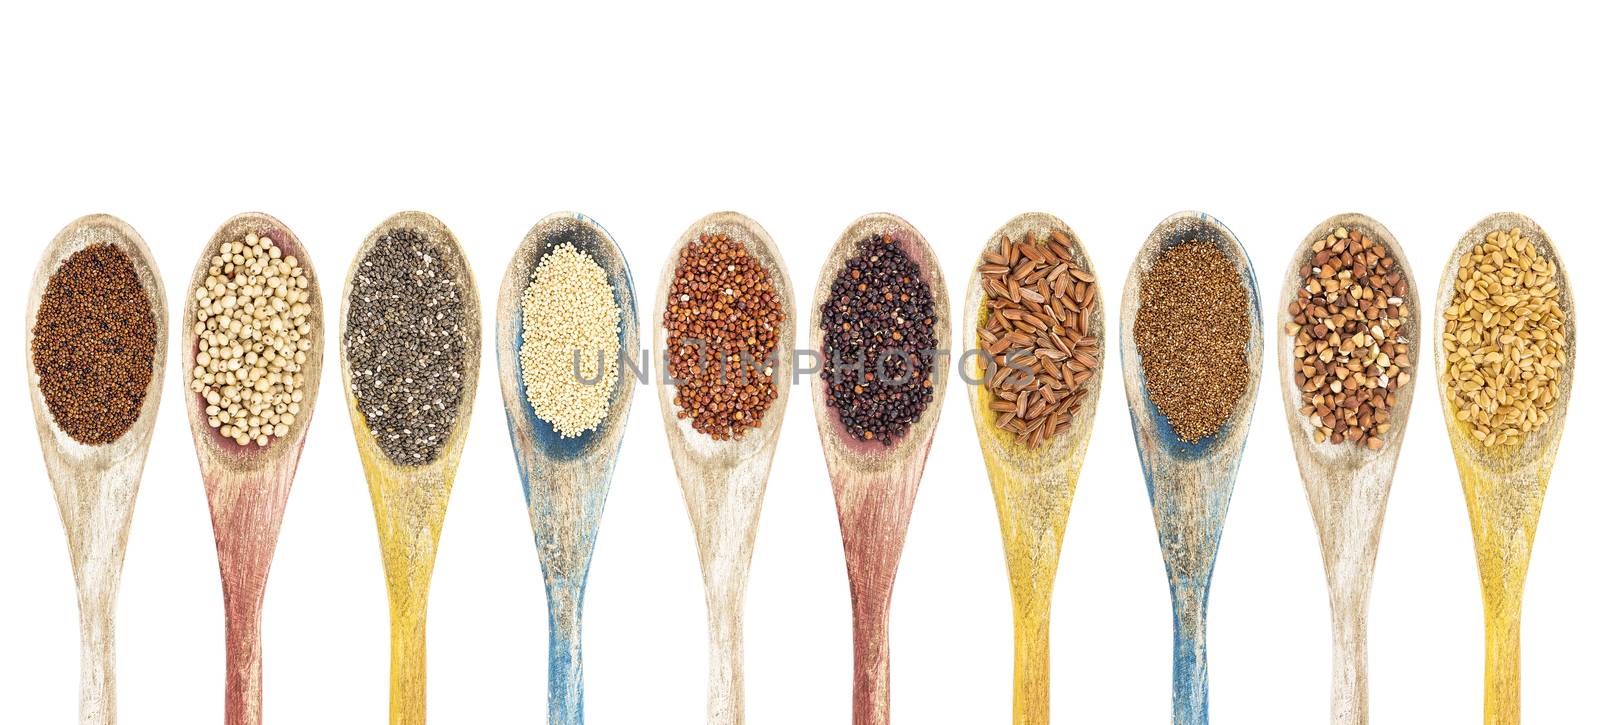 a collection of gluten free grains and seeds on isolated wooden spoons - kaniwa, sorghum, chia, amaranth,red quinoa, black quinoa, brown rice, teff, buckwheat, gold flax (from left to right)